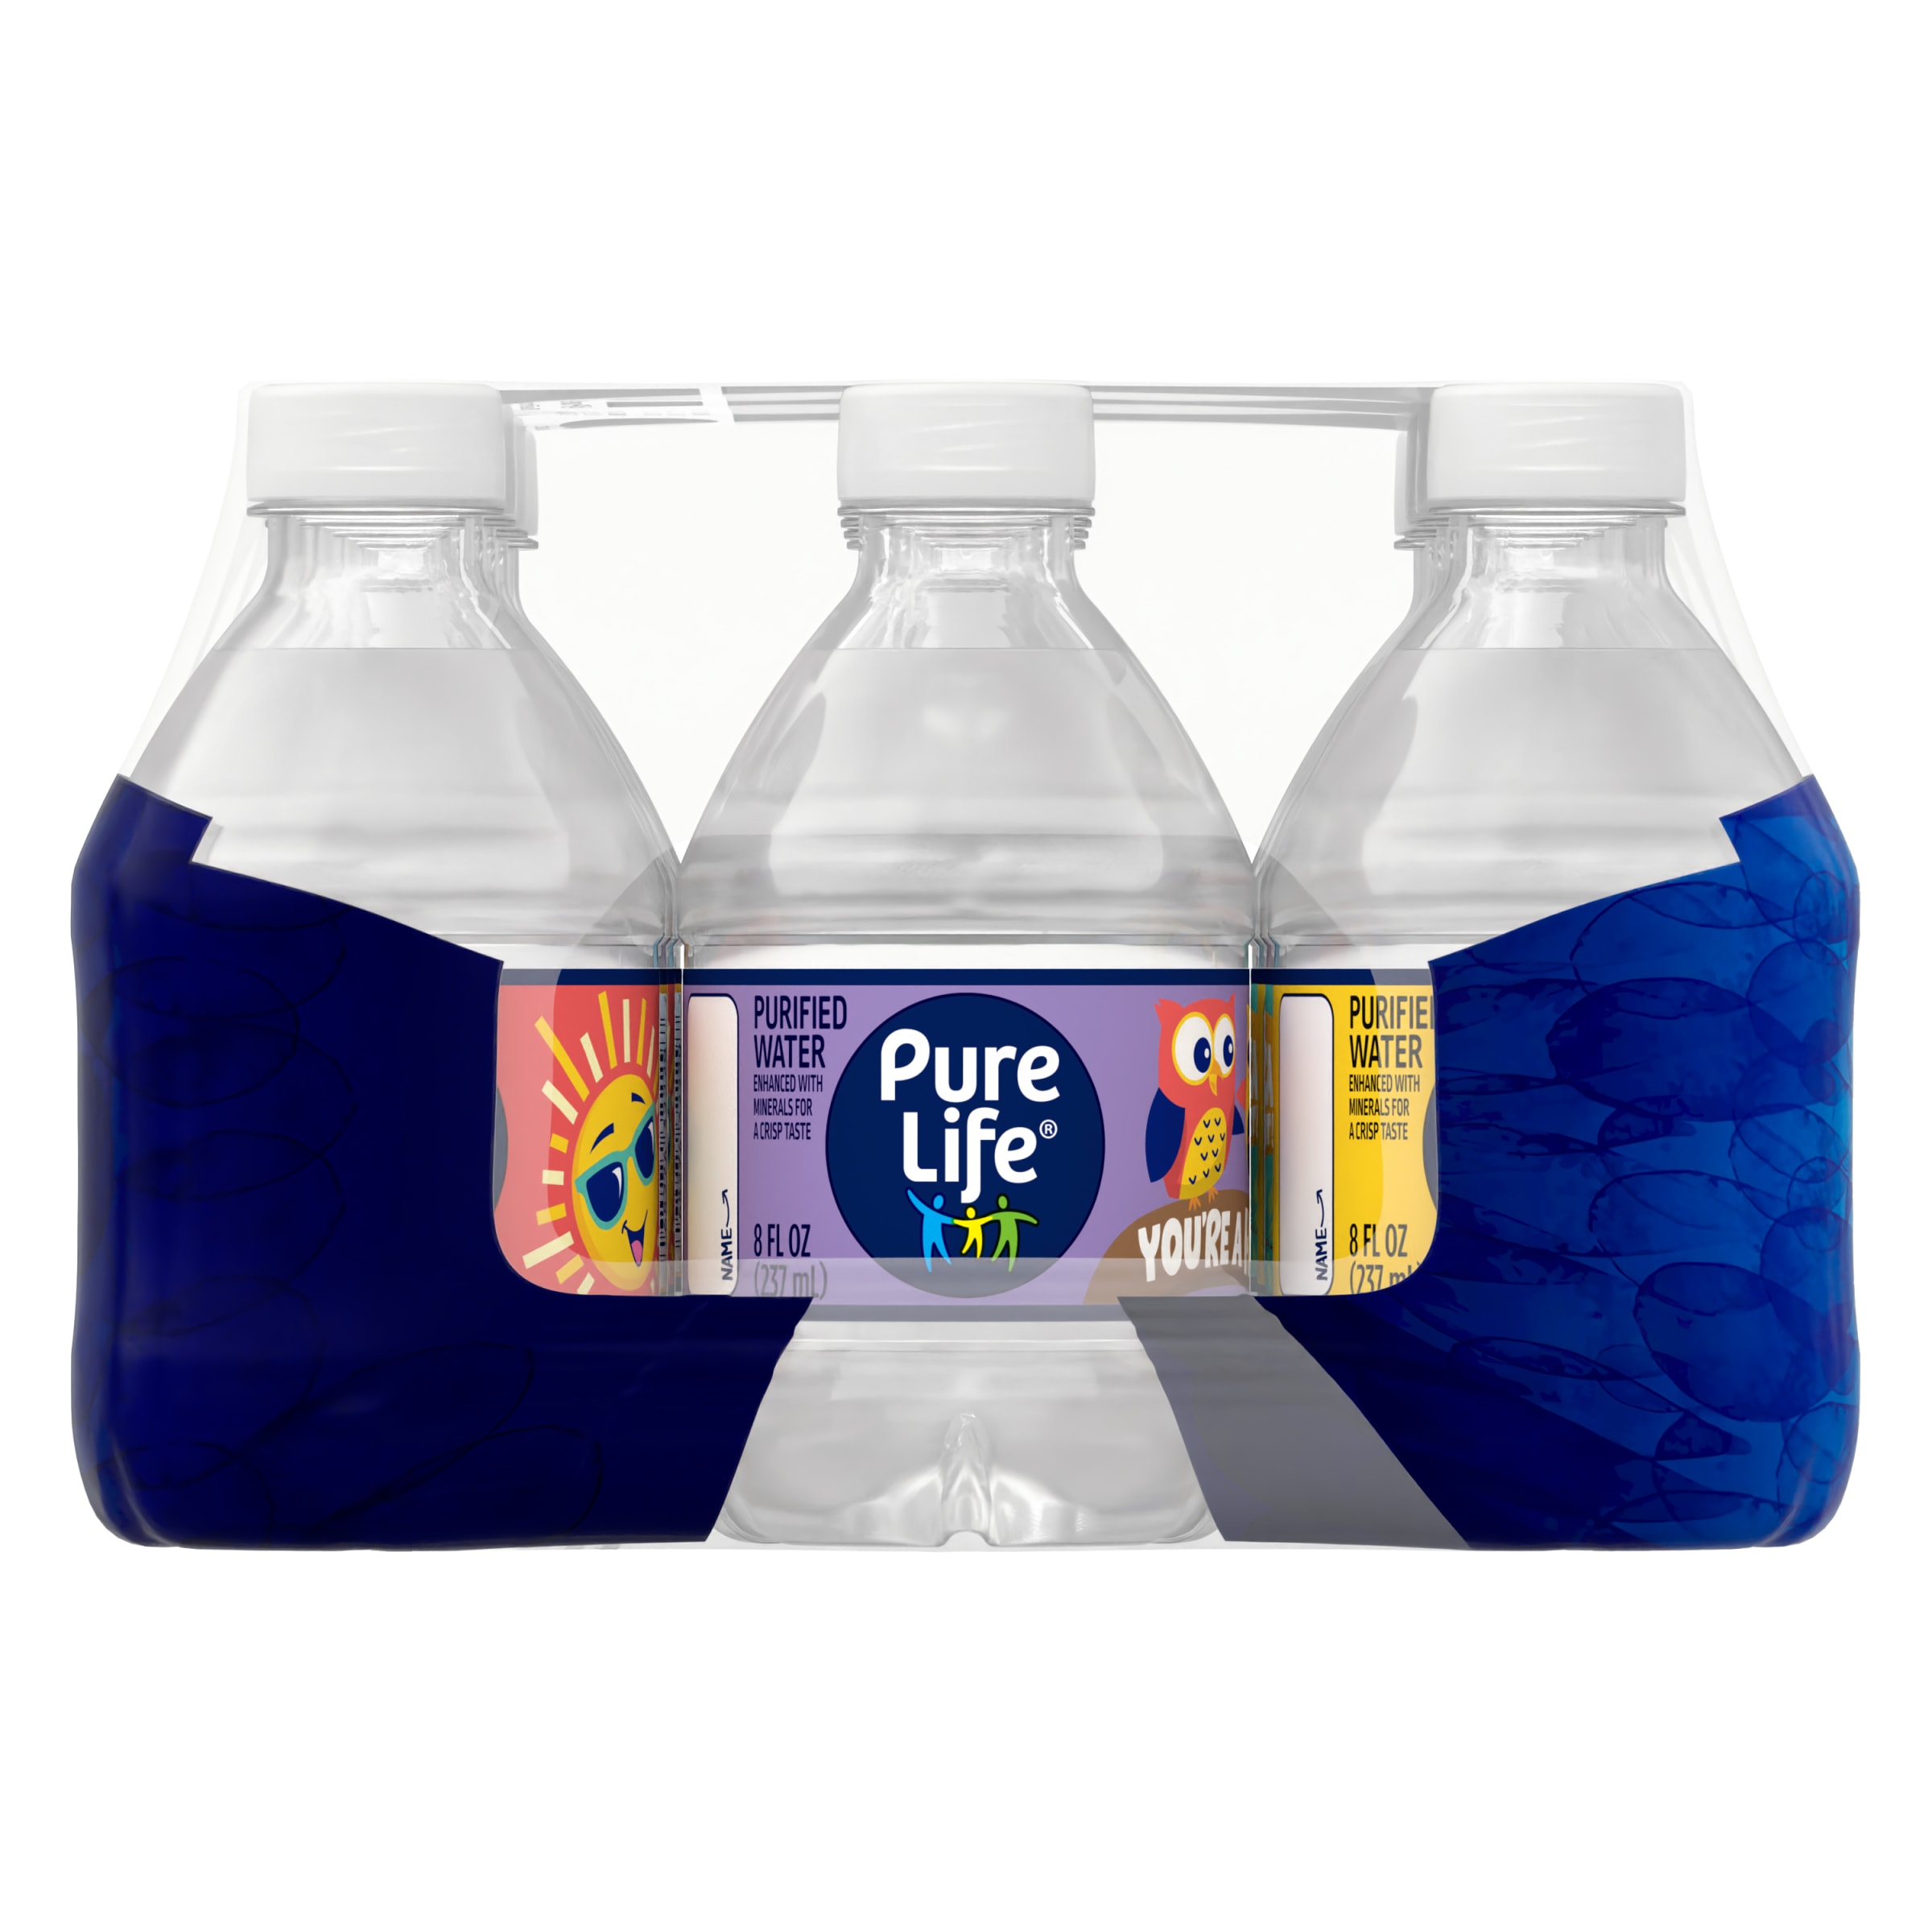 Pure Life Purified Water, 8 Fl Oz, Plastic Bottled Water (12 Pack) - image 8 of 10